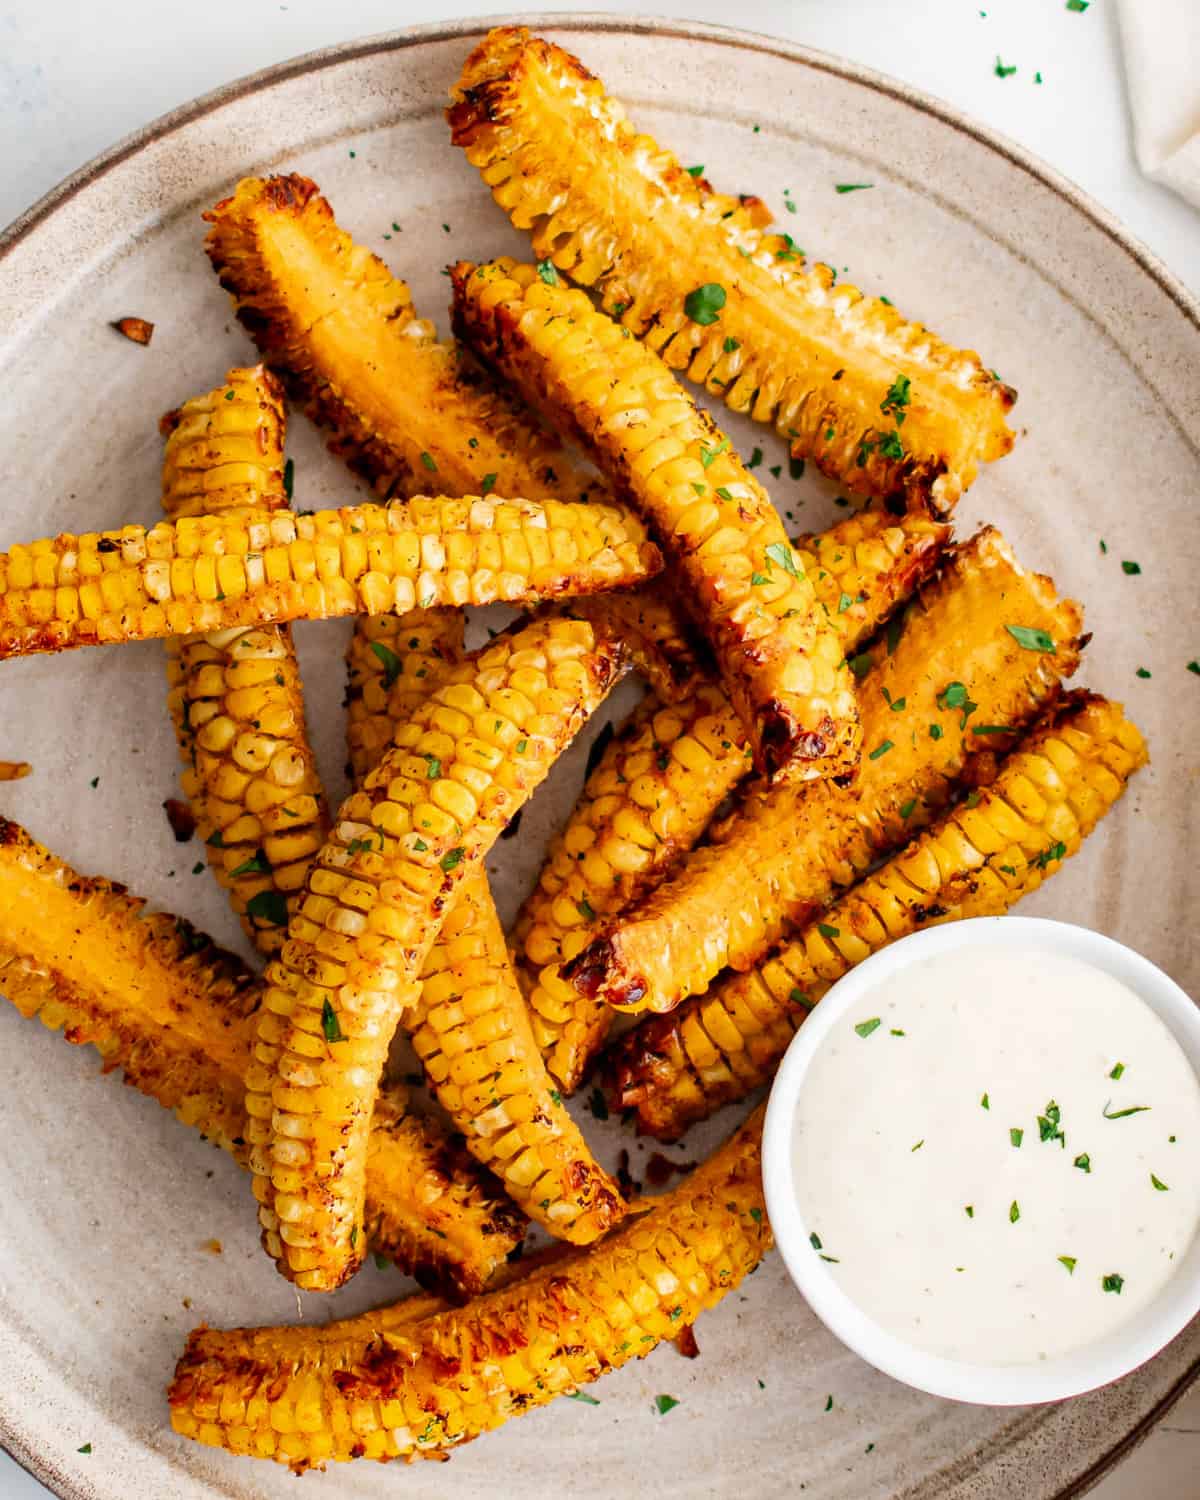 corn ribs served with a flavorful dipping sauce on a plate.